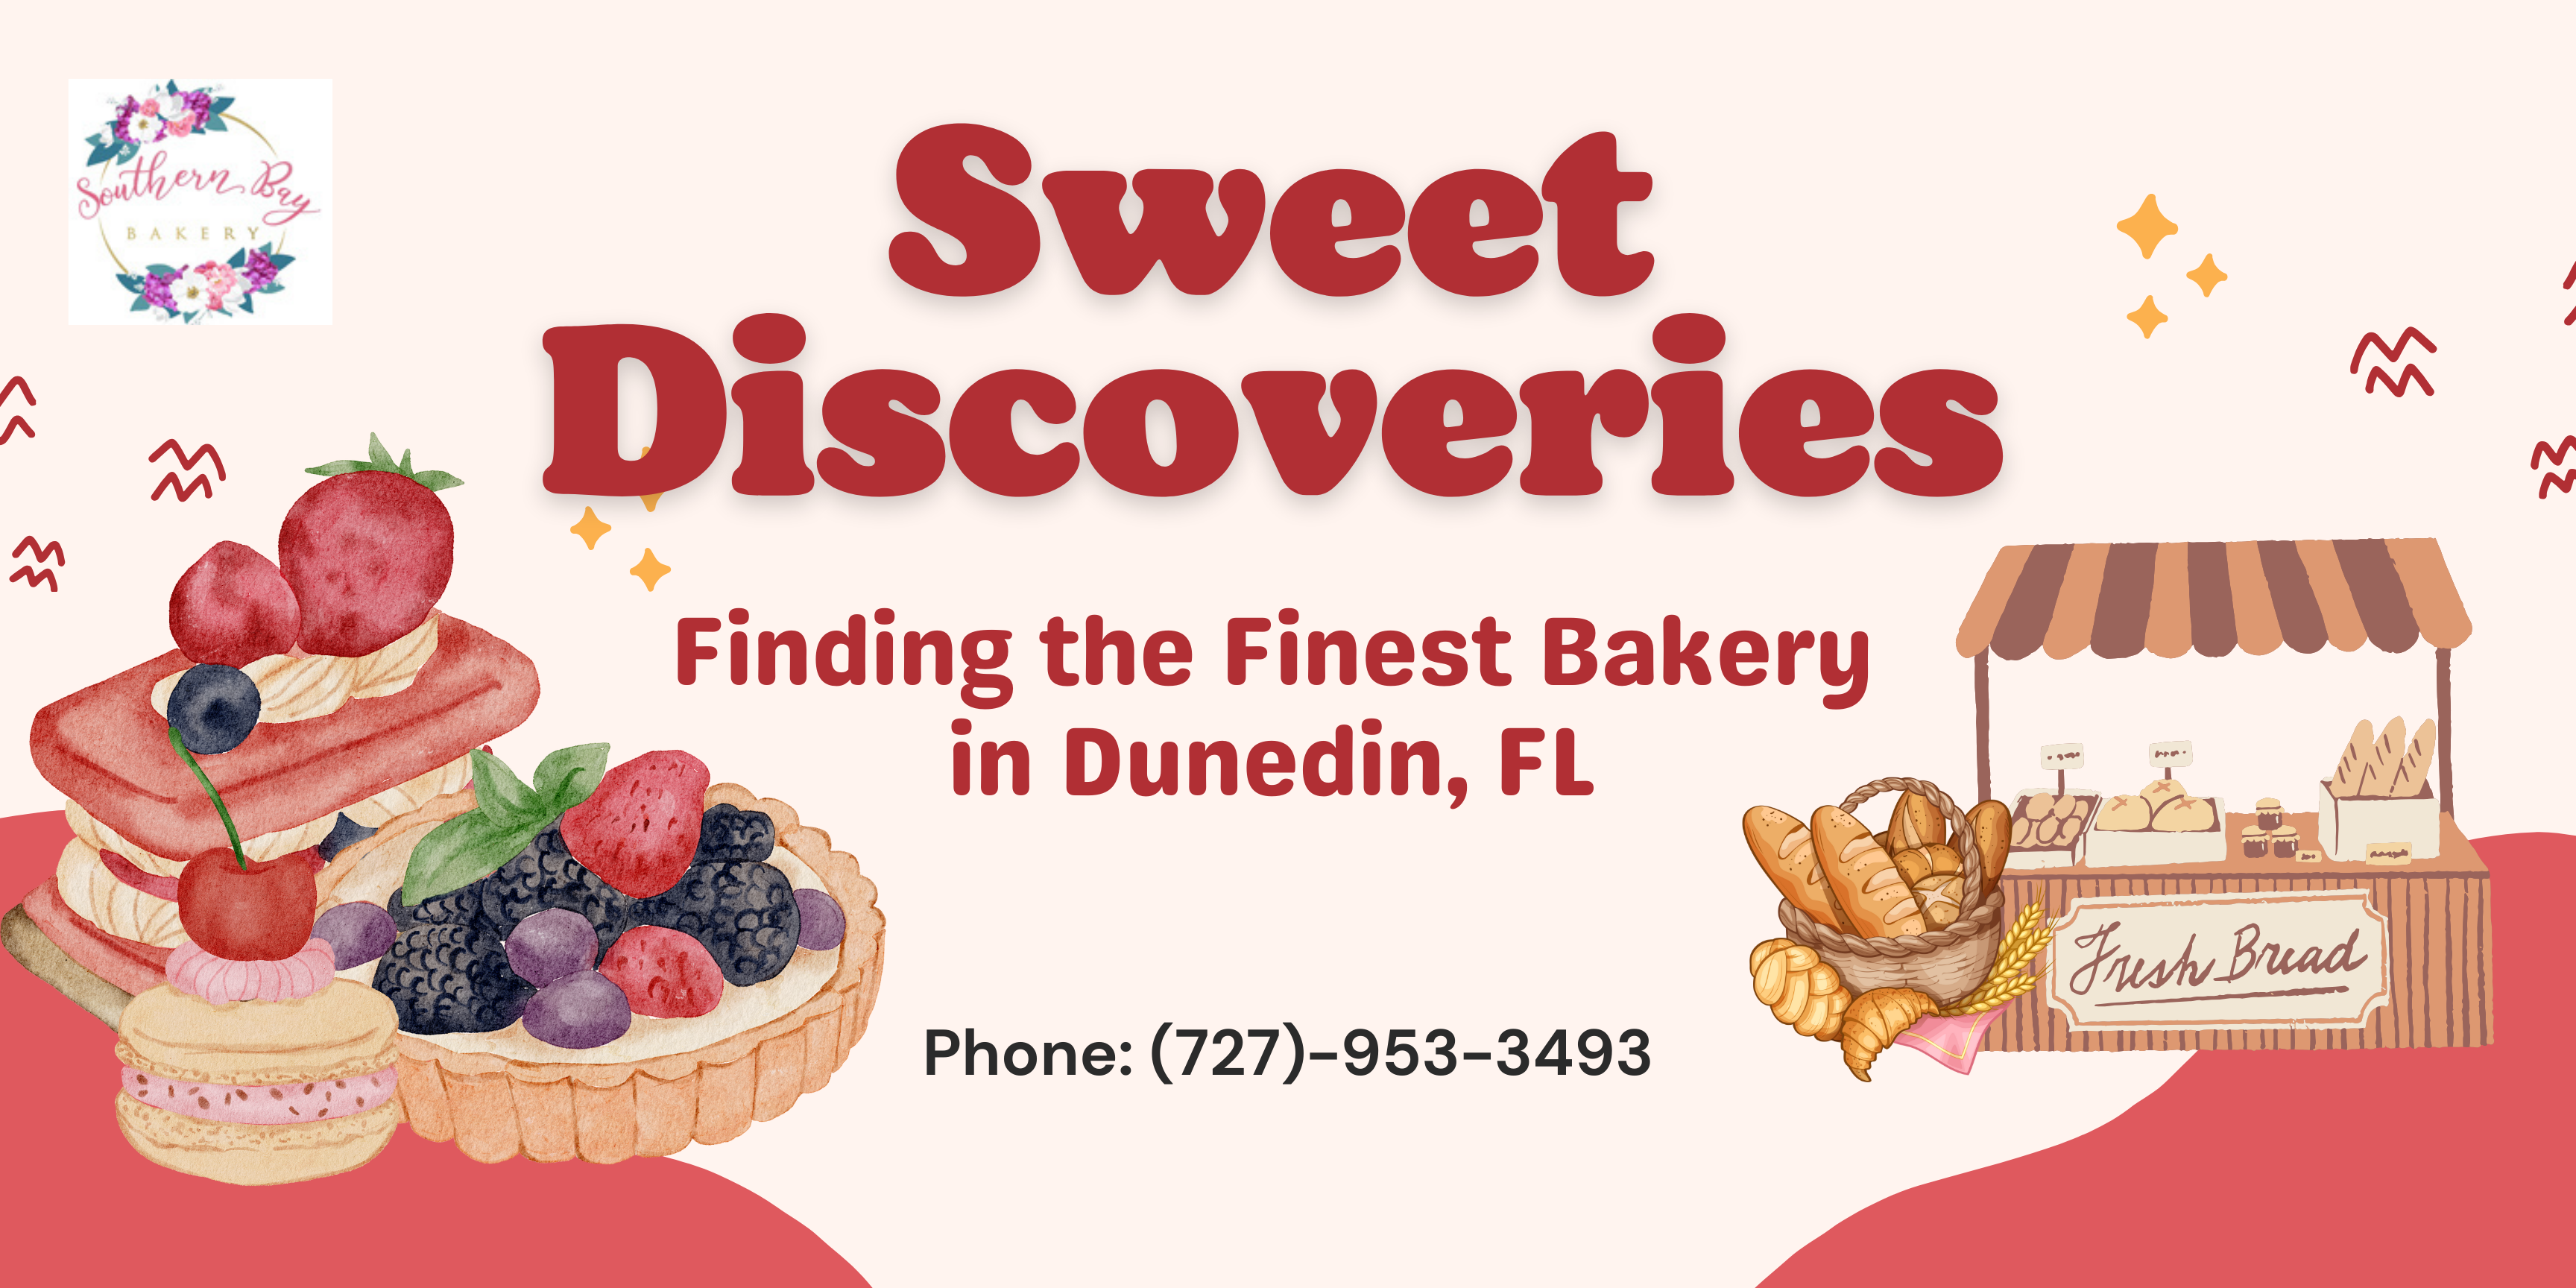 Sweet Discoveries Finding the Finest Bakery in Dunedin, FL